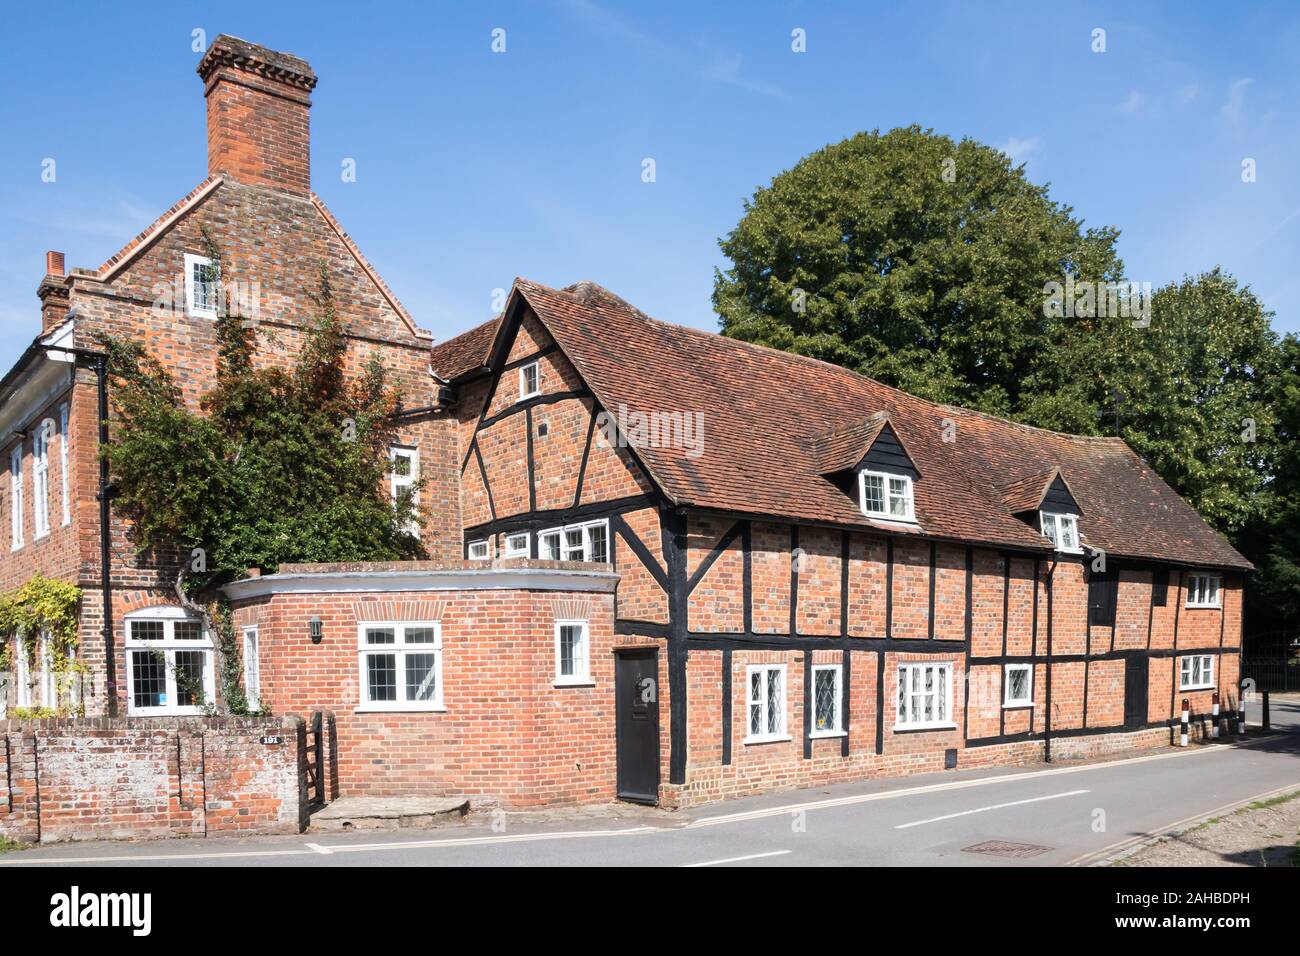 Typical grade II listed buildings in Amersham, Buckinghamshire, England Stock Photo